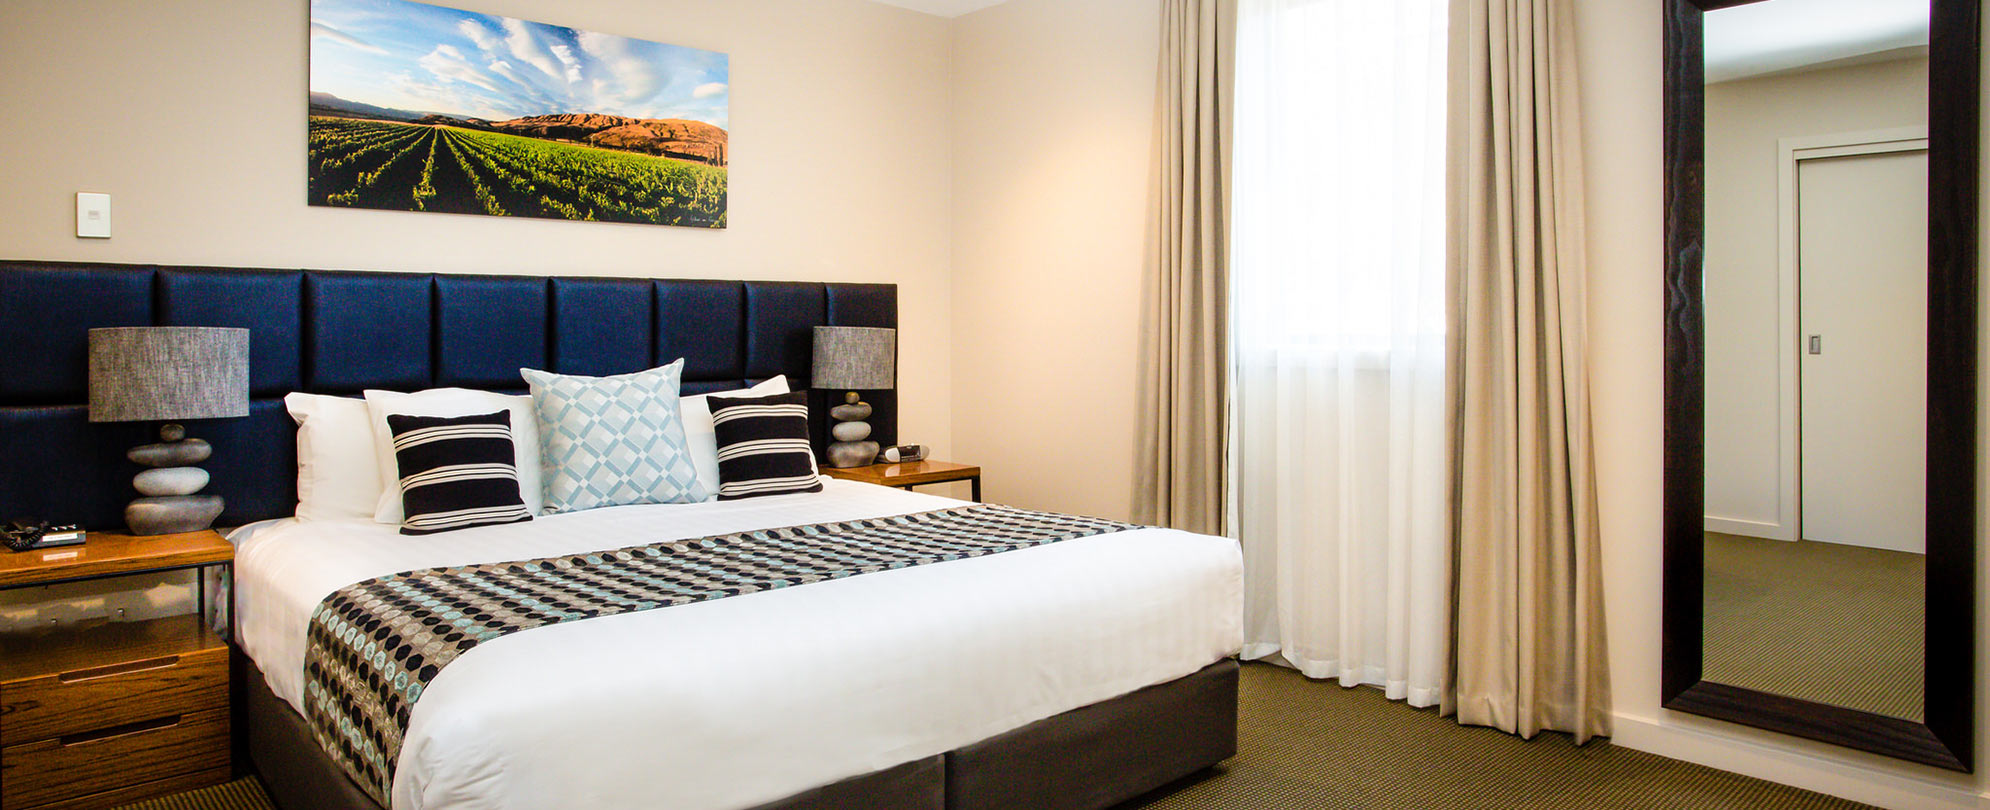 The master bedroom of the standard suite at Club Wyndham Wanaka.